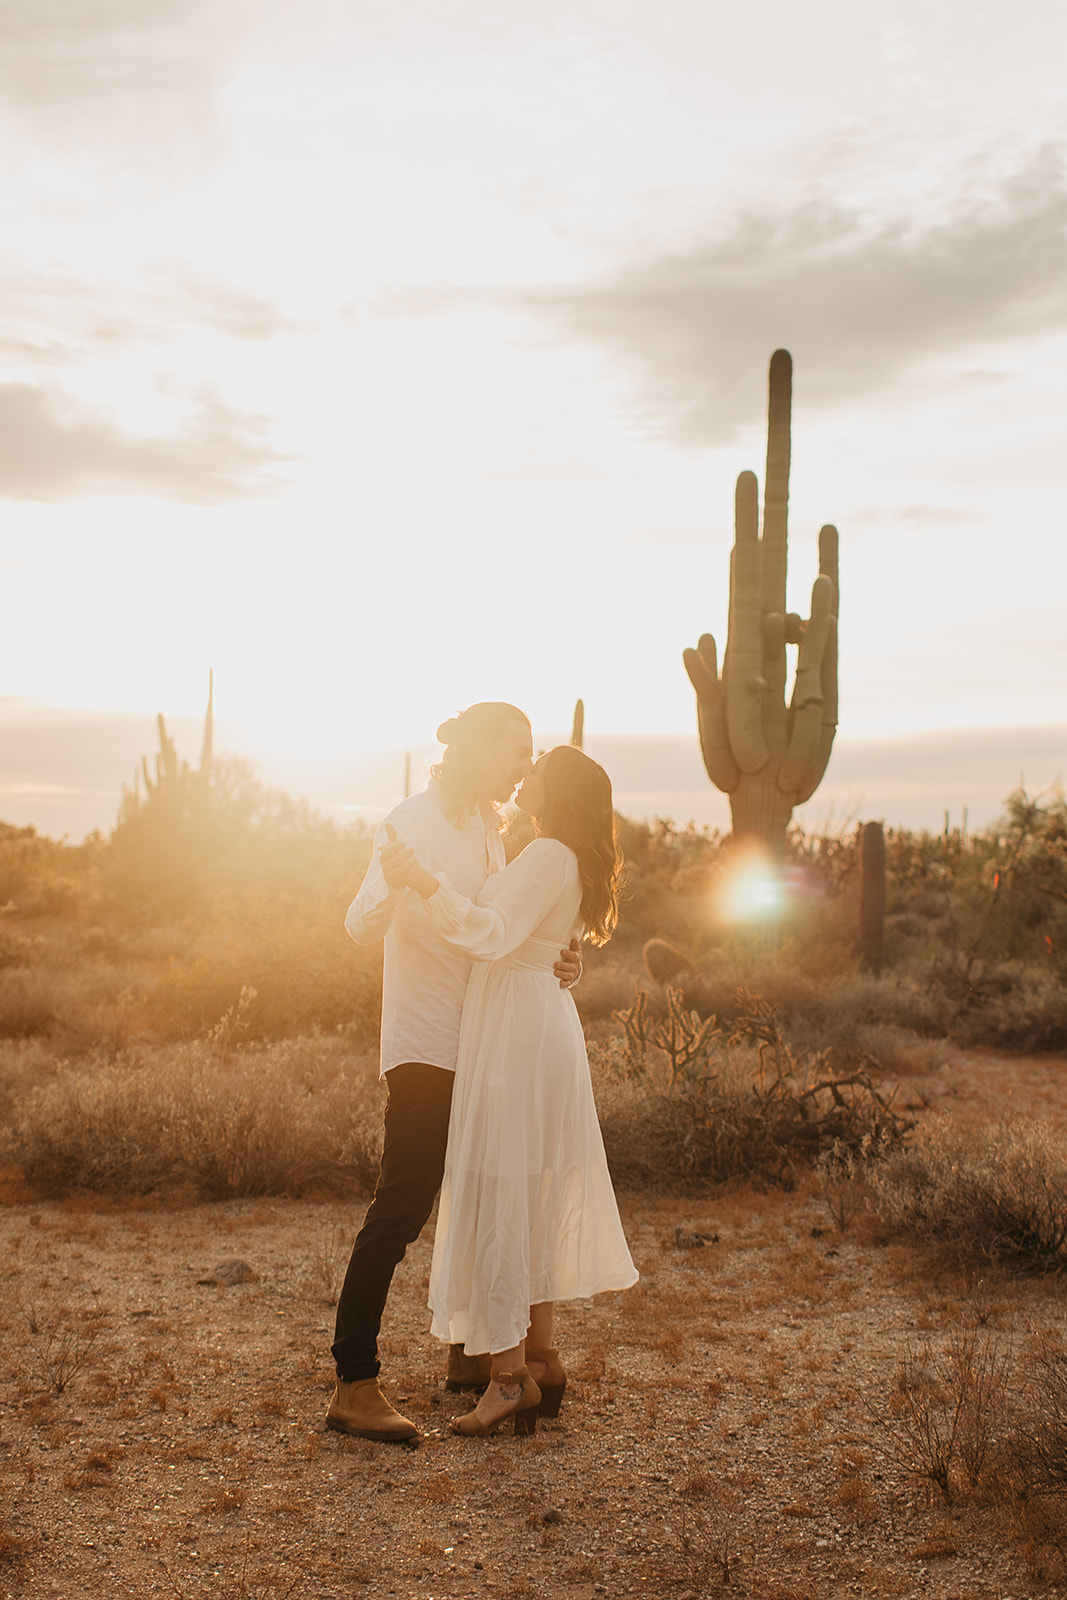 couples dancing in the desert sunset